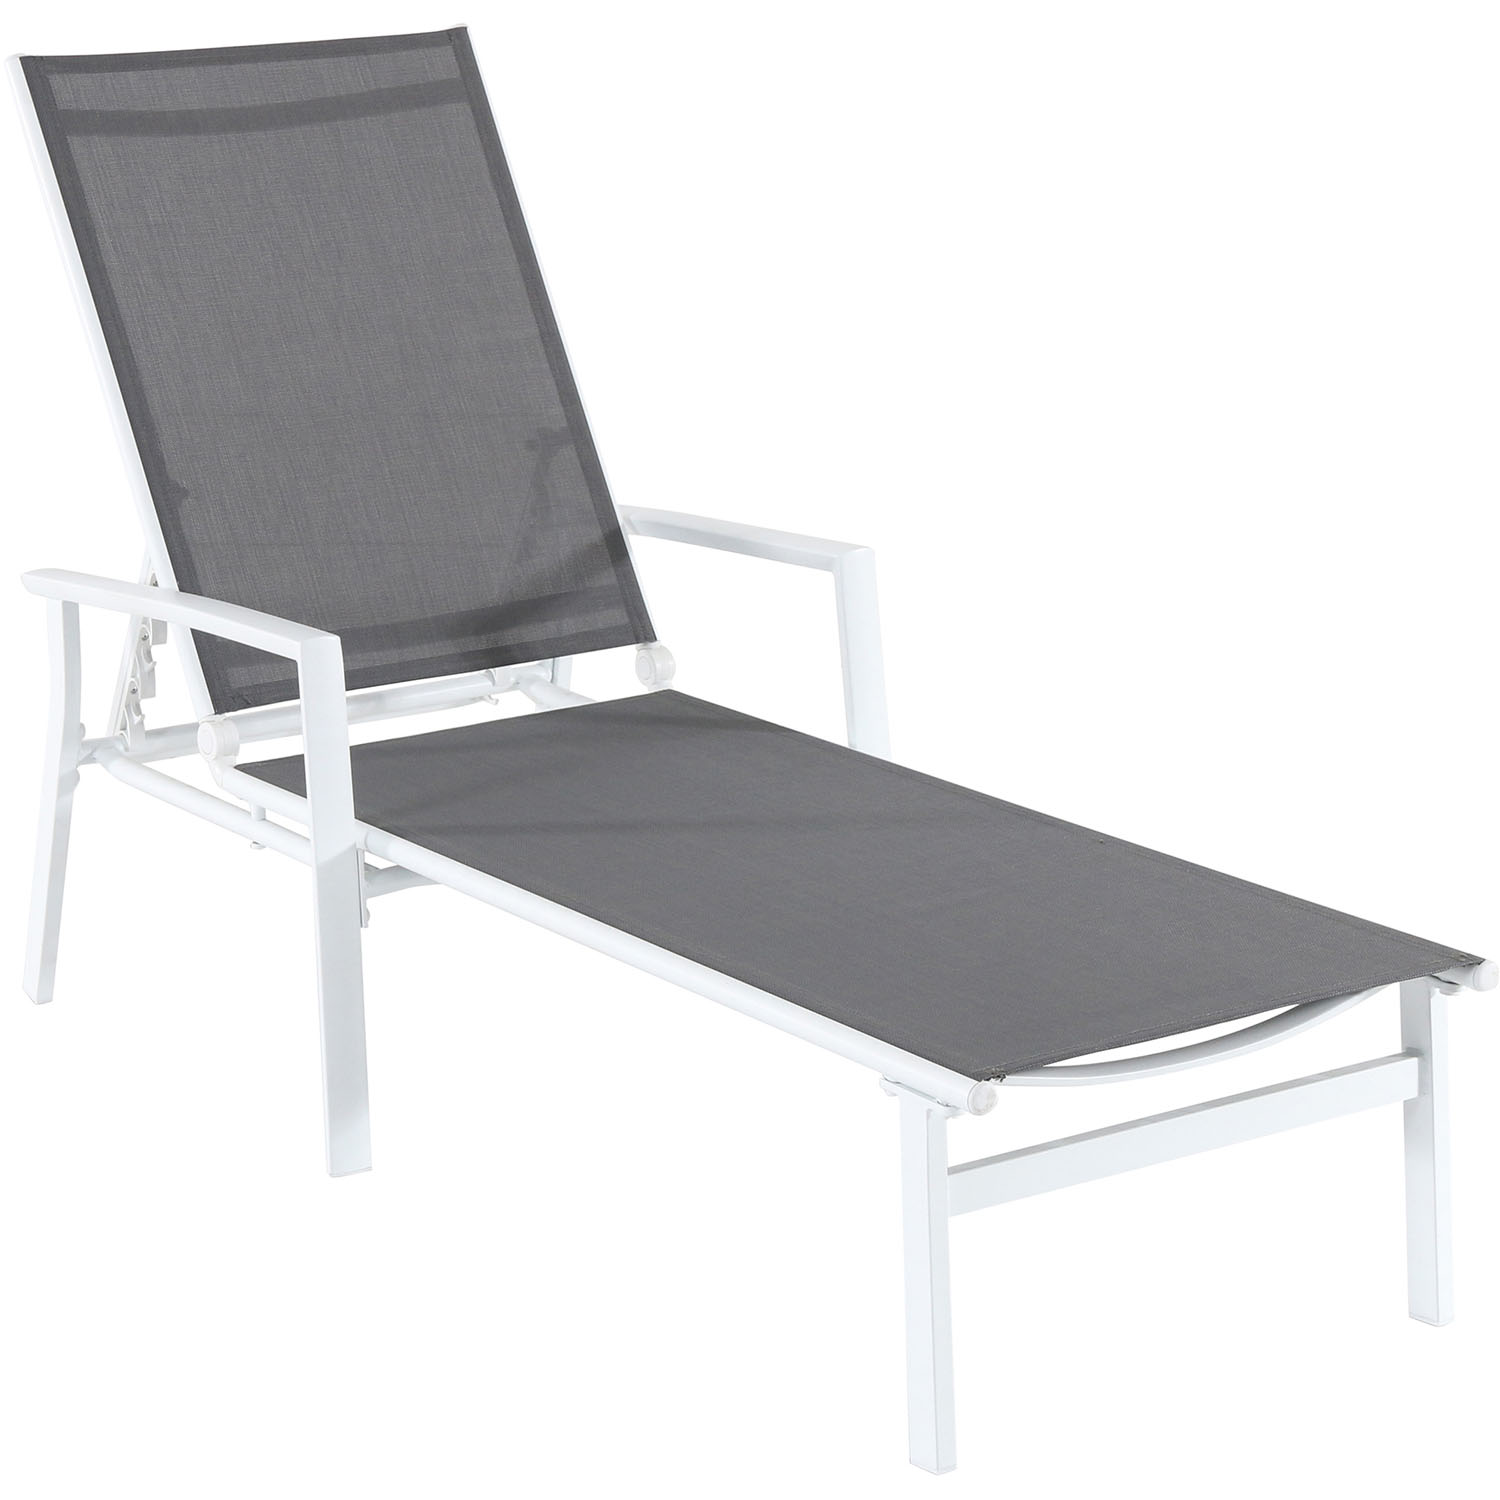 Hanover Naples 2x2 Sling Outdoor Folding Chaise Lounge Chair, Gray - image 3 of 19